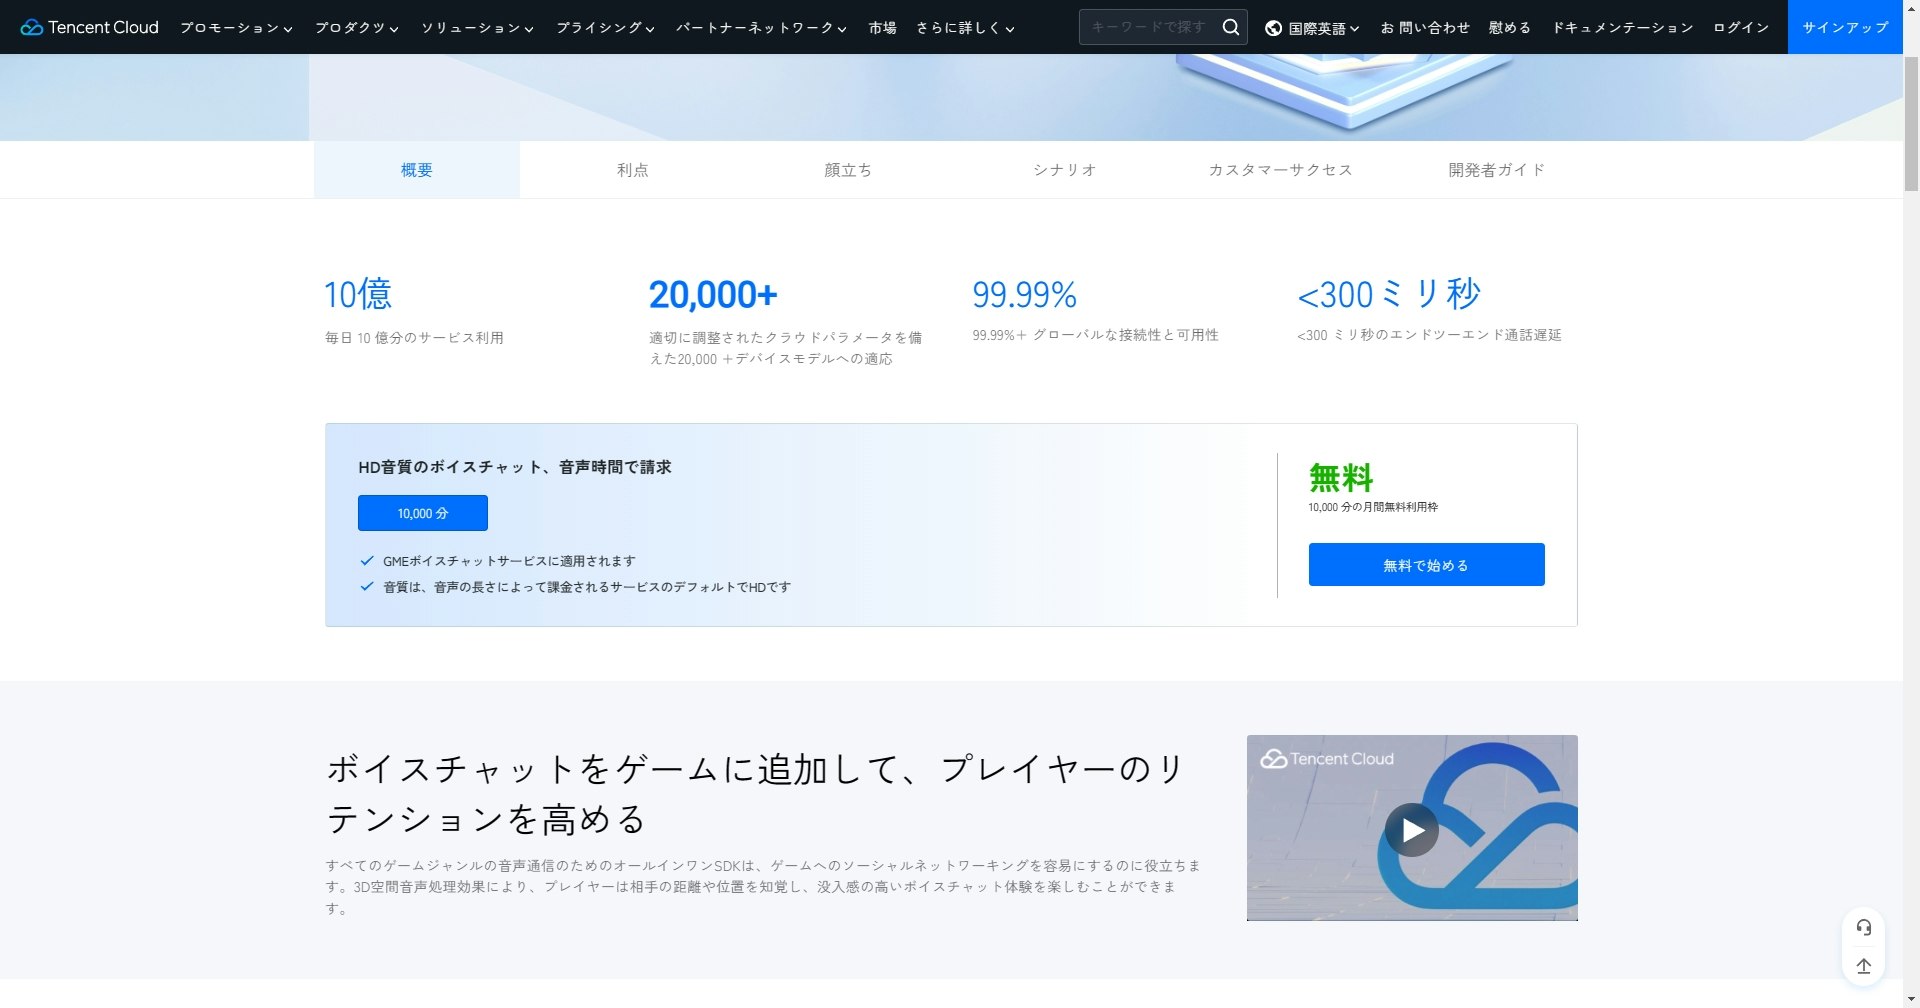 Tencent Cloud GMEの公式サイト